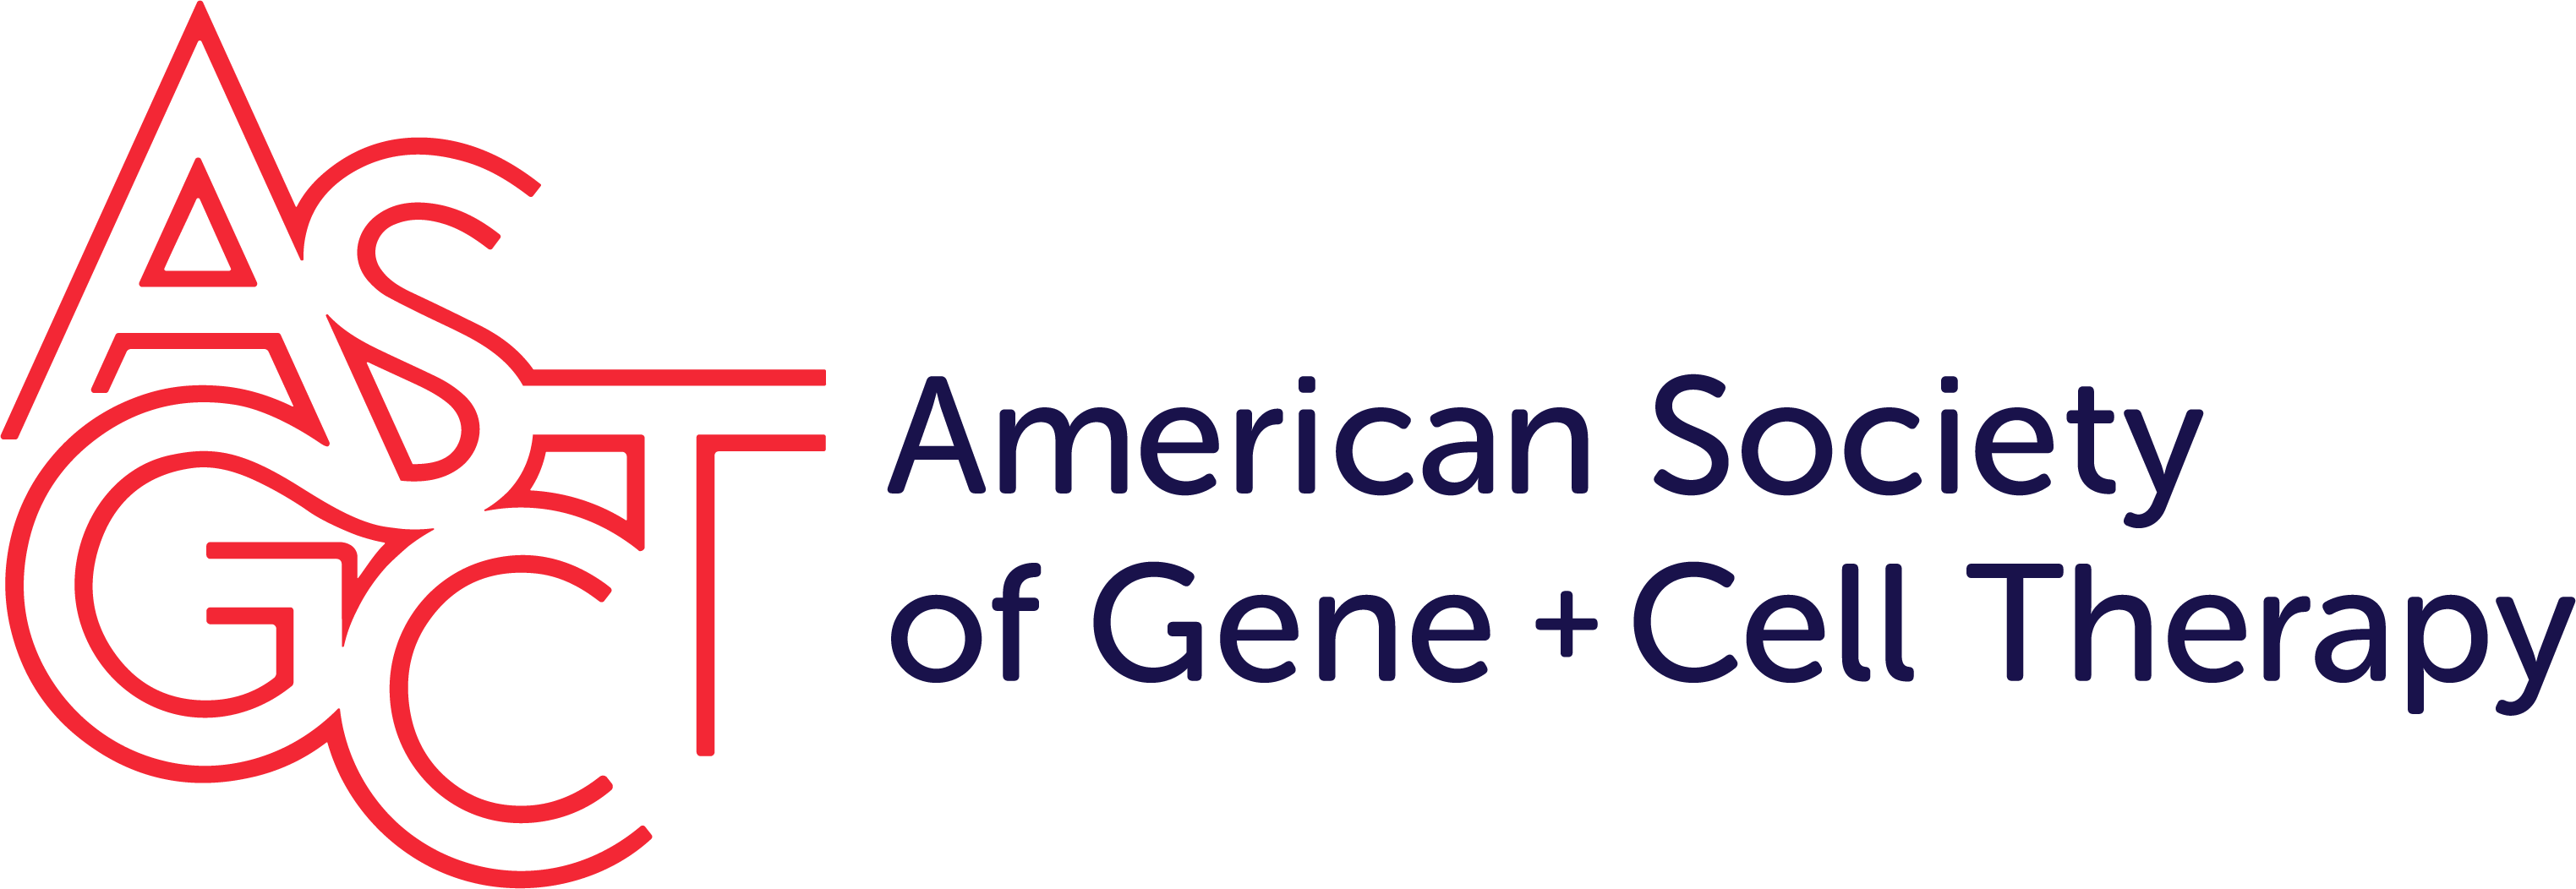 American Society of Gene and Cell Therapy